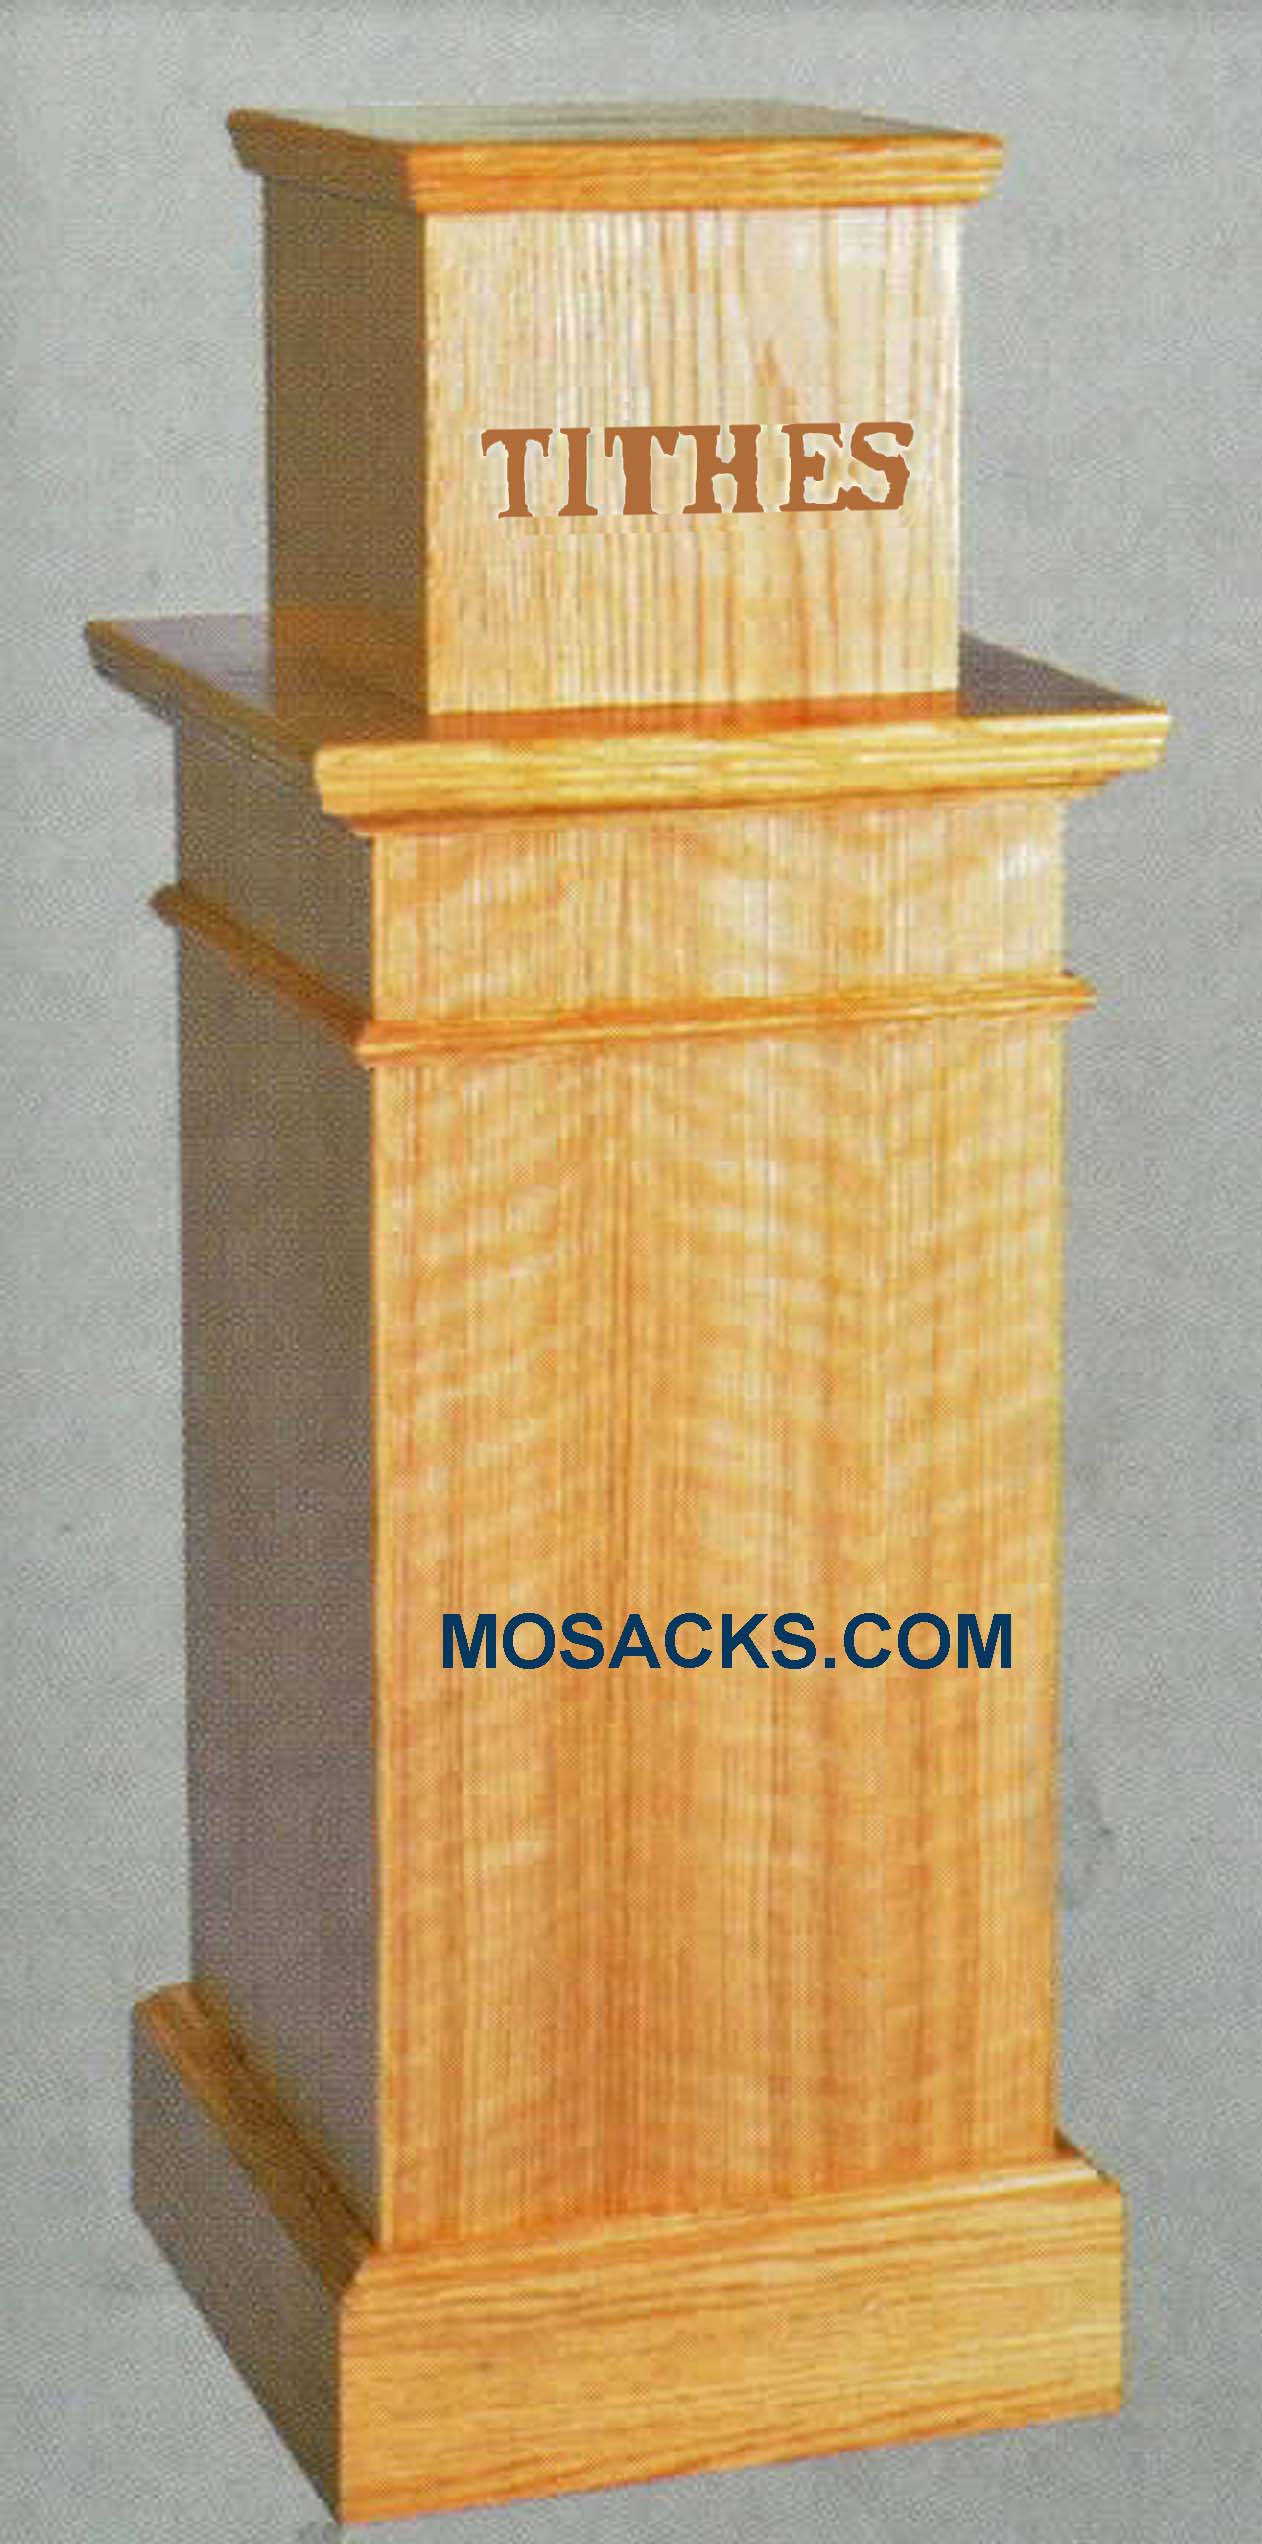 Wooden TITHES  Box with Lettering, without light 16" w x 16" x d x 42" h 40-1161 various wood stains available  lock, door and bag,  TITHES on the front, 1161